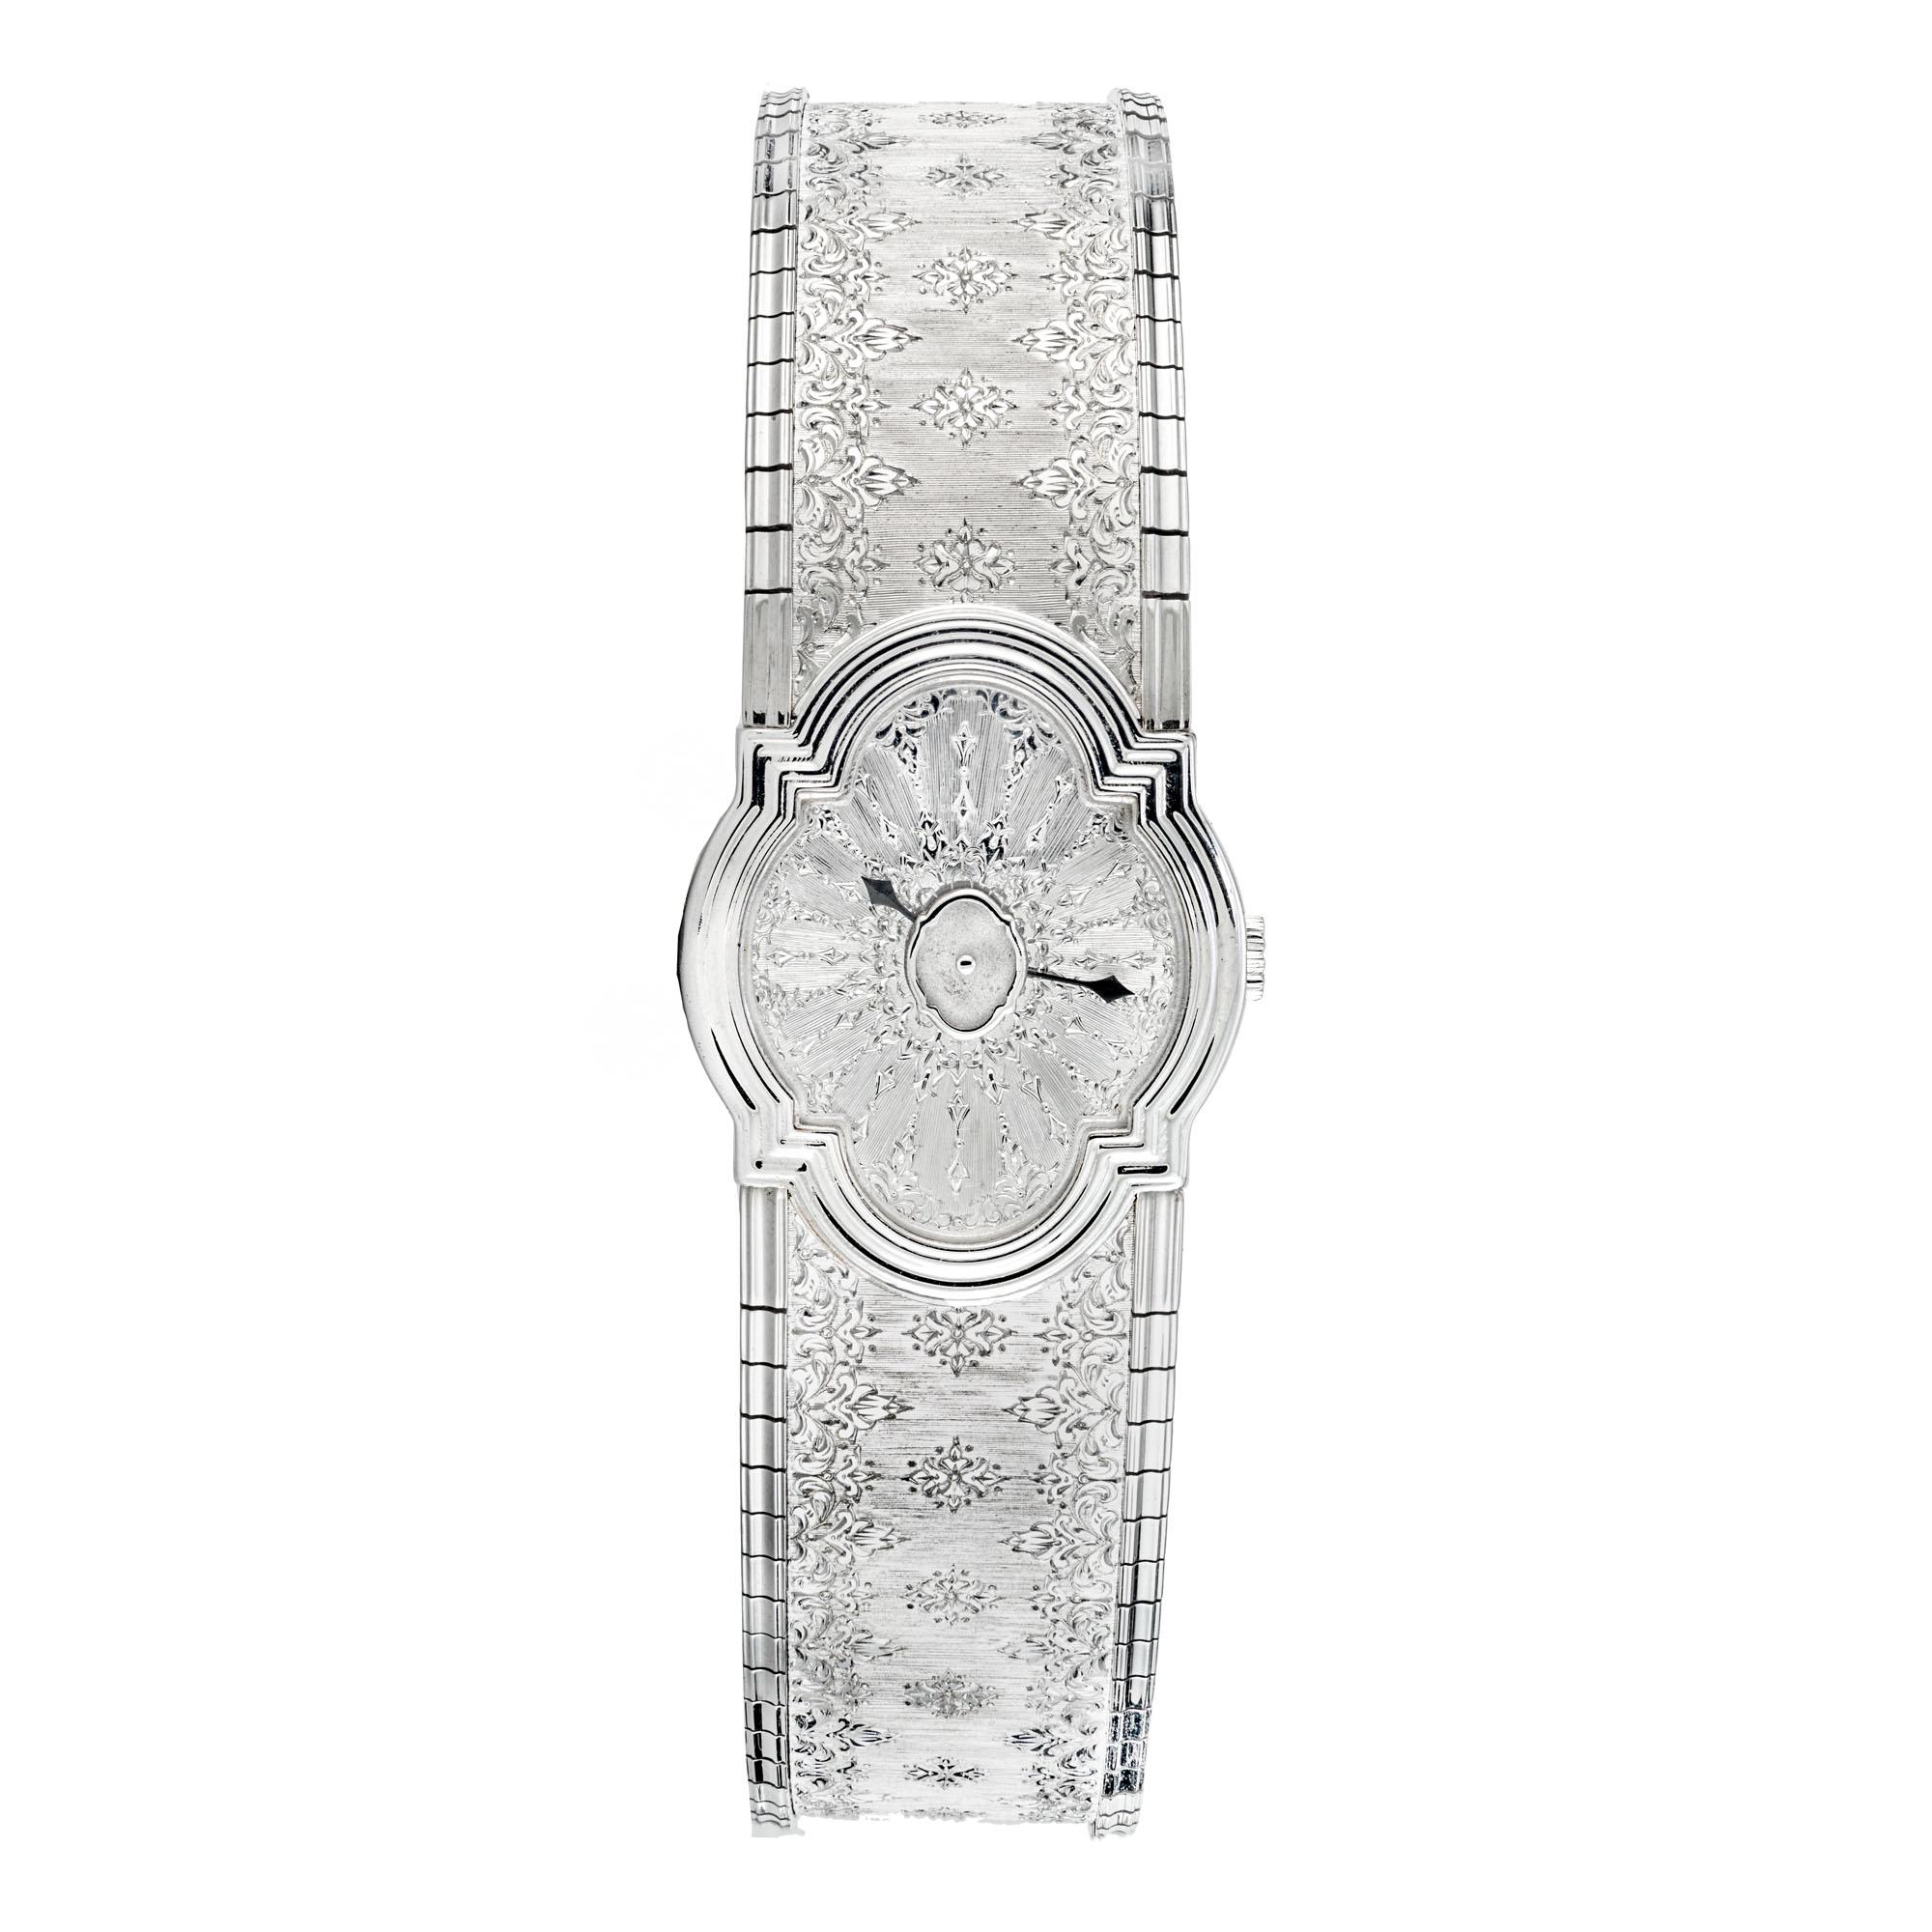 Buccellati Ladies Arischron 18k white gold wristwatch. Number 008 of a series of only 100 watches, of those 100 watches production included white and yellow gold. 7 inches long. The Arischron design is a perfect example of The Art of